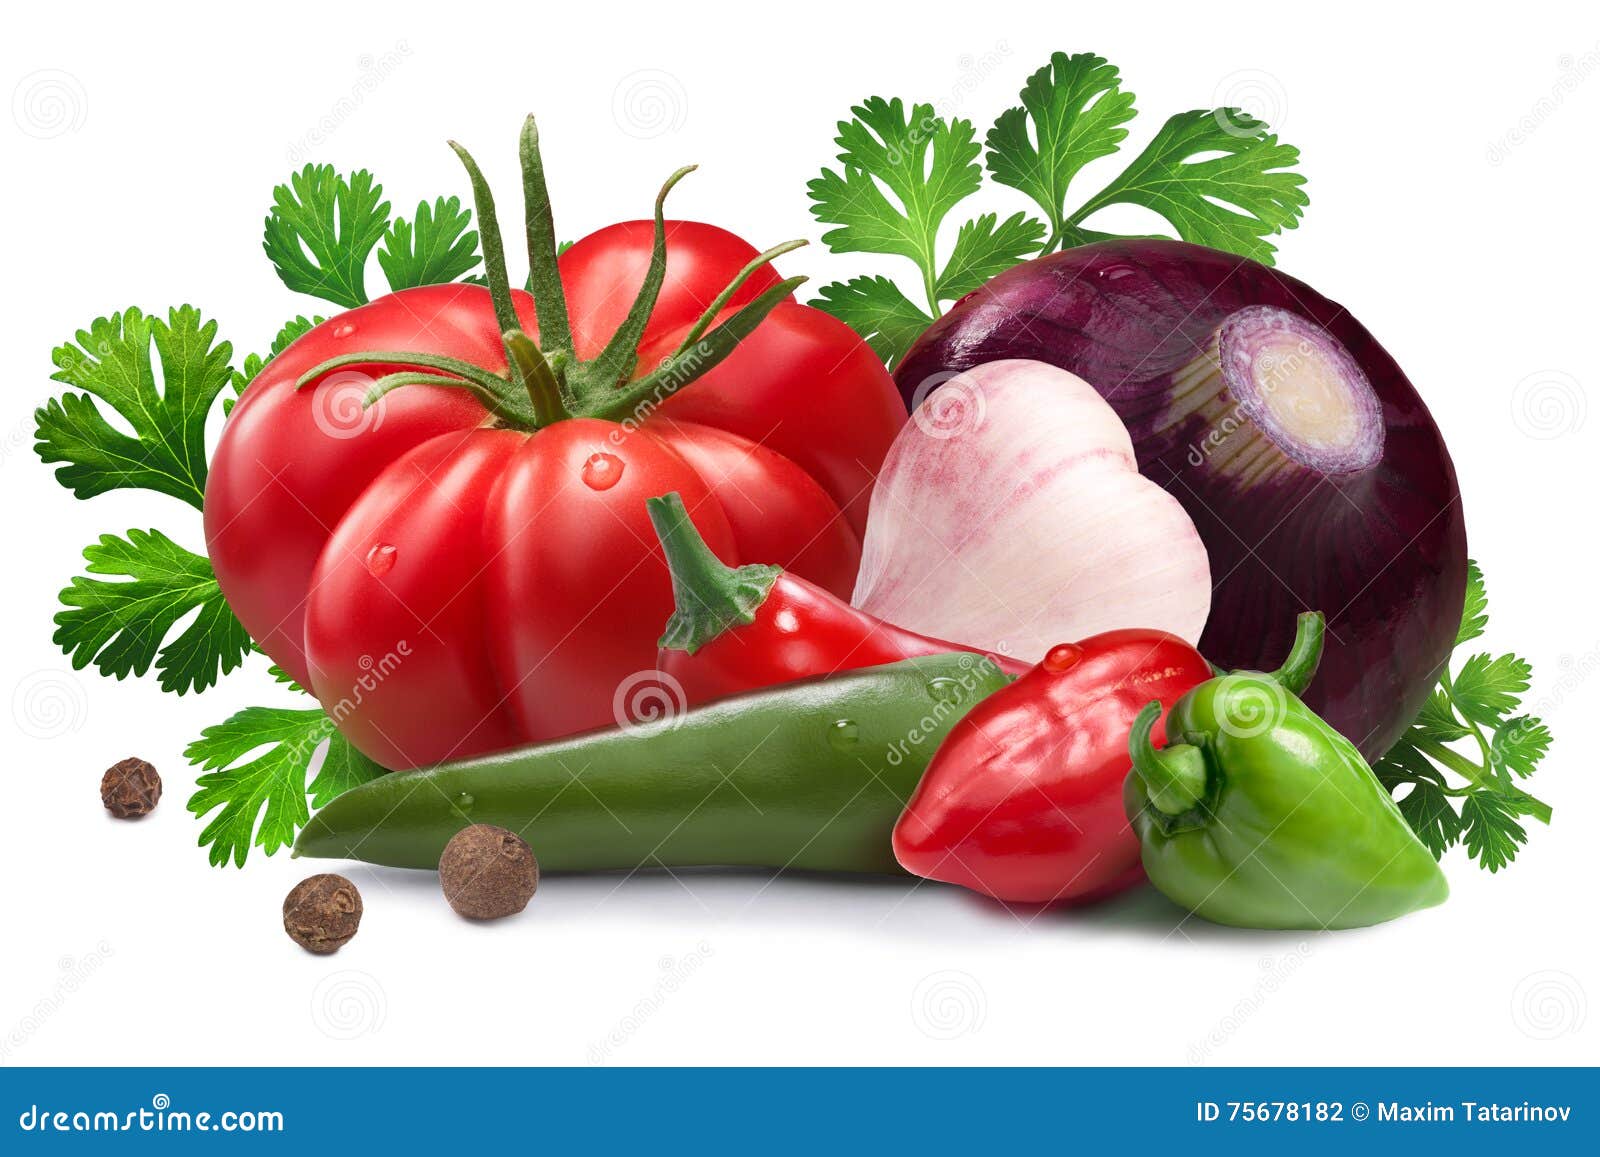 ingredients for salsa roja sauce, clipping paths